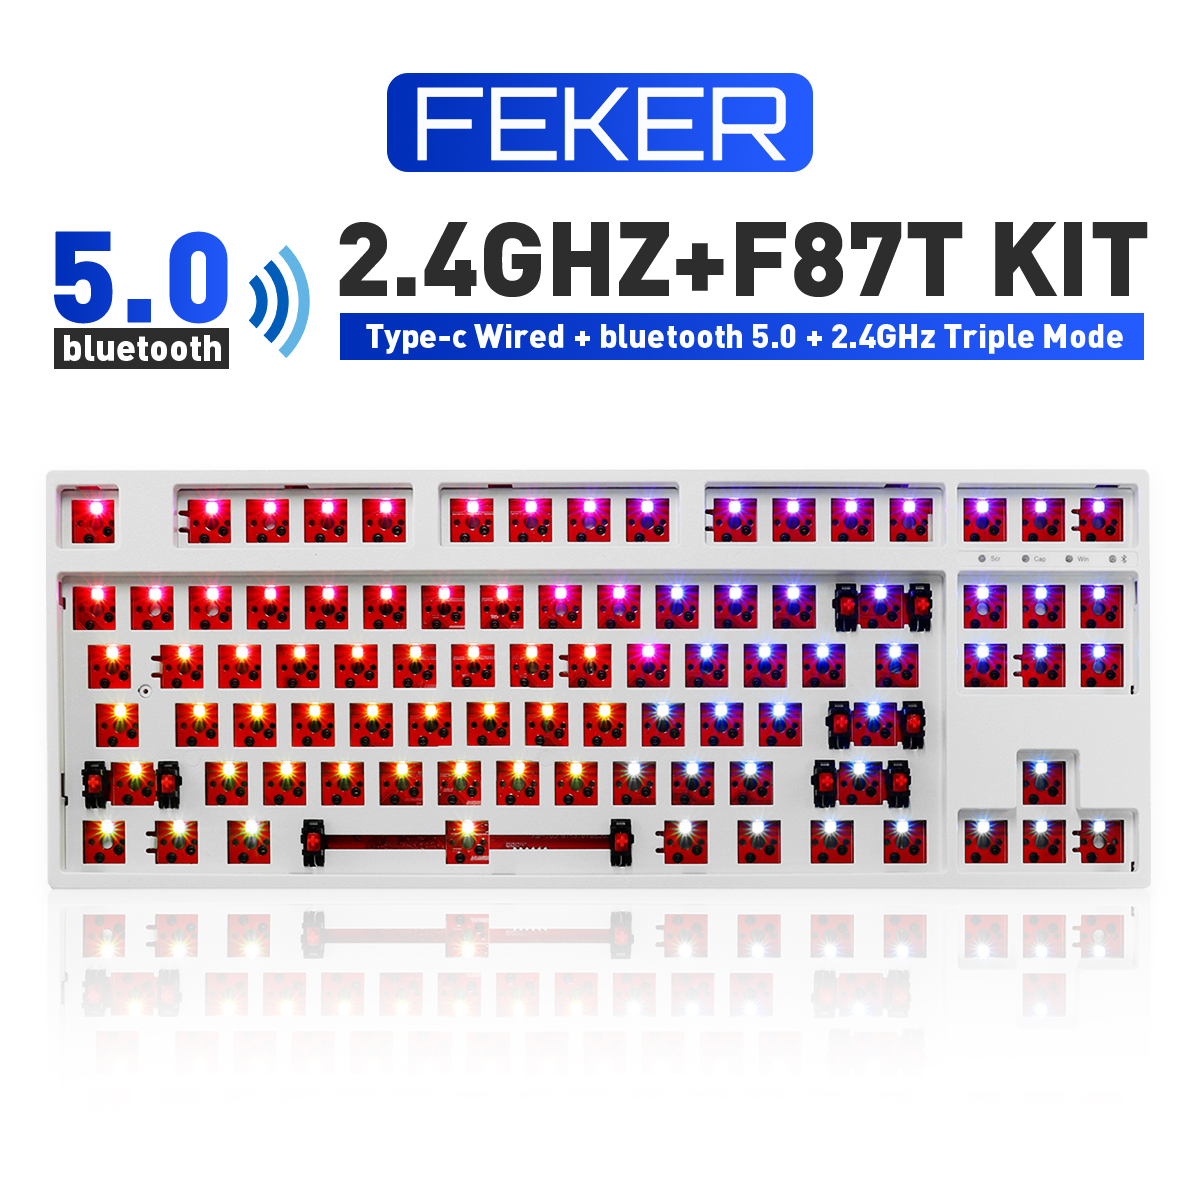 FEKER-87-Keys-Customized-Keyboard-Kit-Hotswappable-24G-bluetooth-RGB-Backlight-Frosted-ABS-Case-DIY--1876697-1